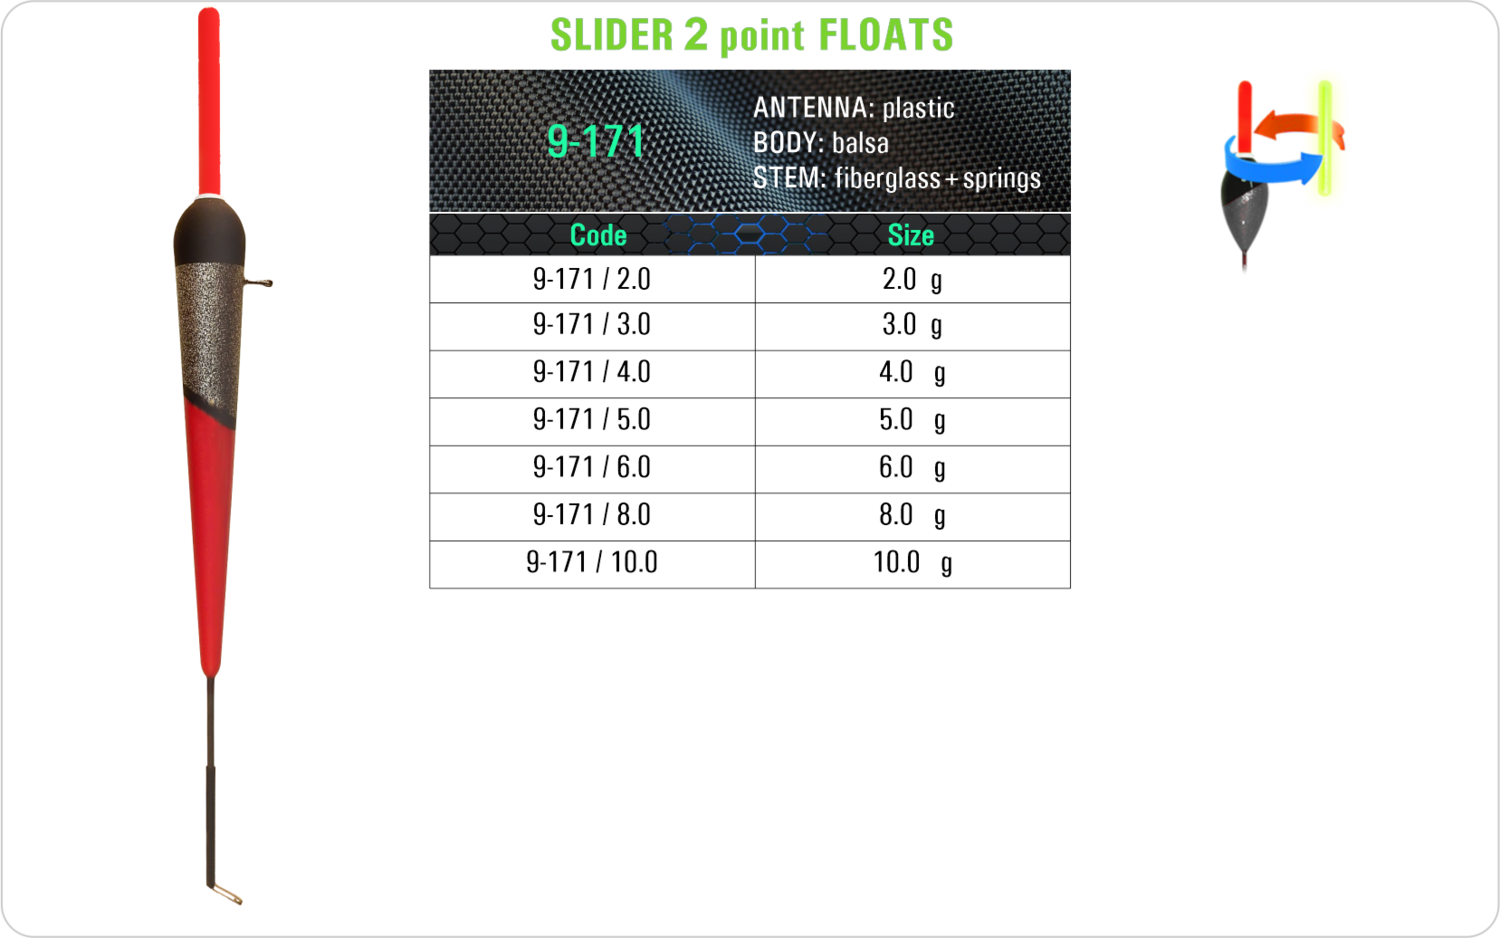 SF 9-171 - Lake and river float model and table containing an additional information about this float with different codes, sizes, types of the body, the stem and the antenna of the float.